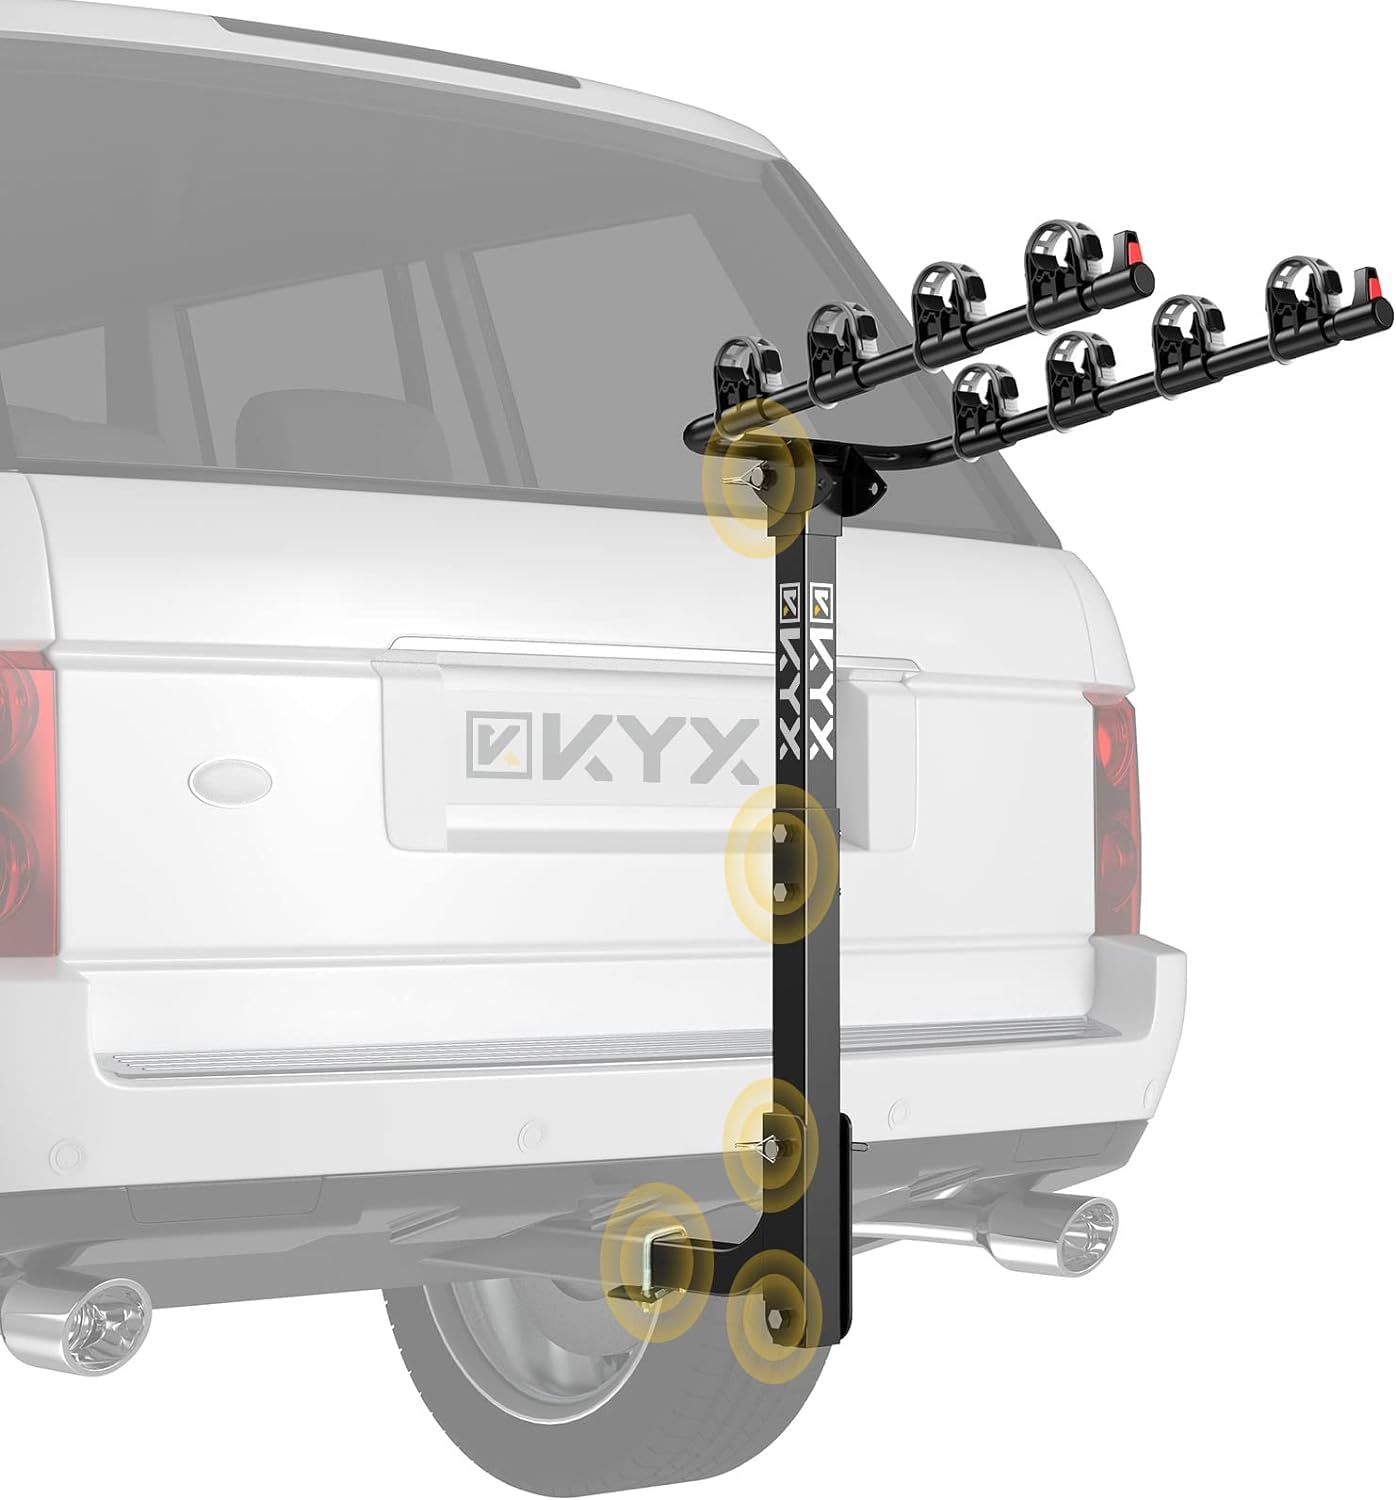 KYX Bike Rack Hitch Mount 4 Bikes, Bike Rack for Car, SUV, RV Up to 143 lbs Load, Bicycle Car Racks Carrier with No-Wobble Bolt and Lock Straps, Tilt Release, Easy Assemble Bike Rack for 2'' Receiver